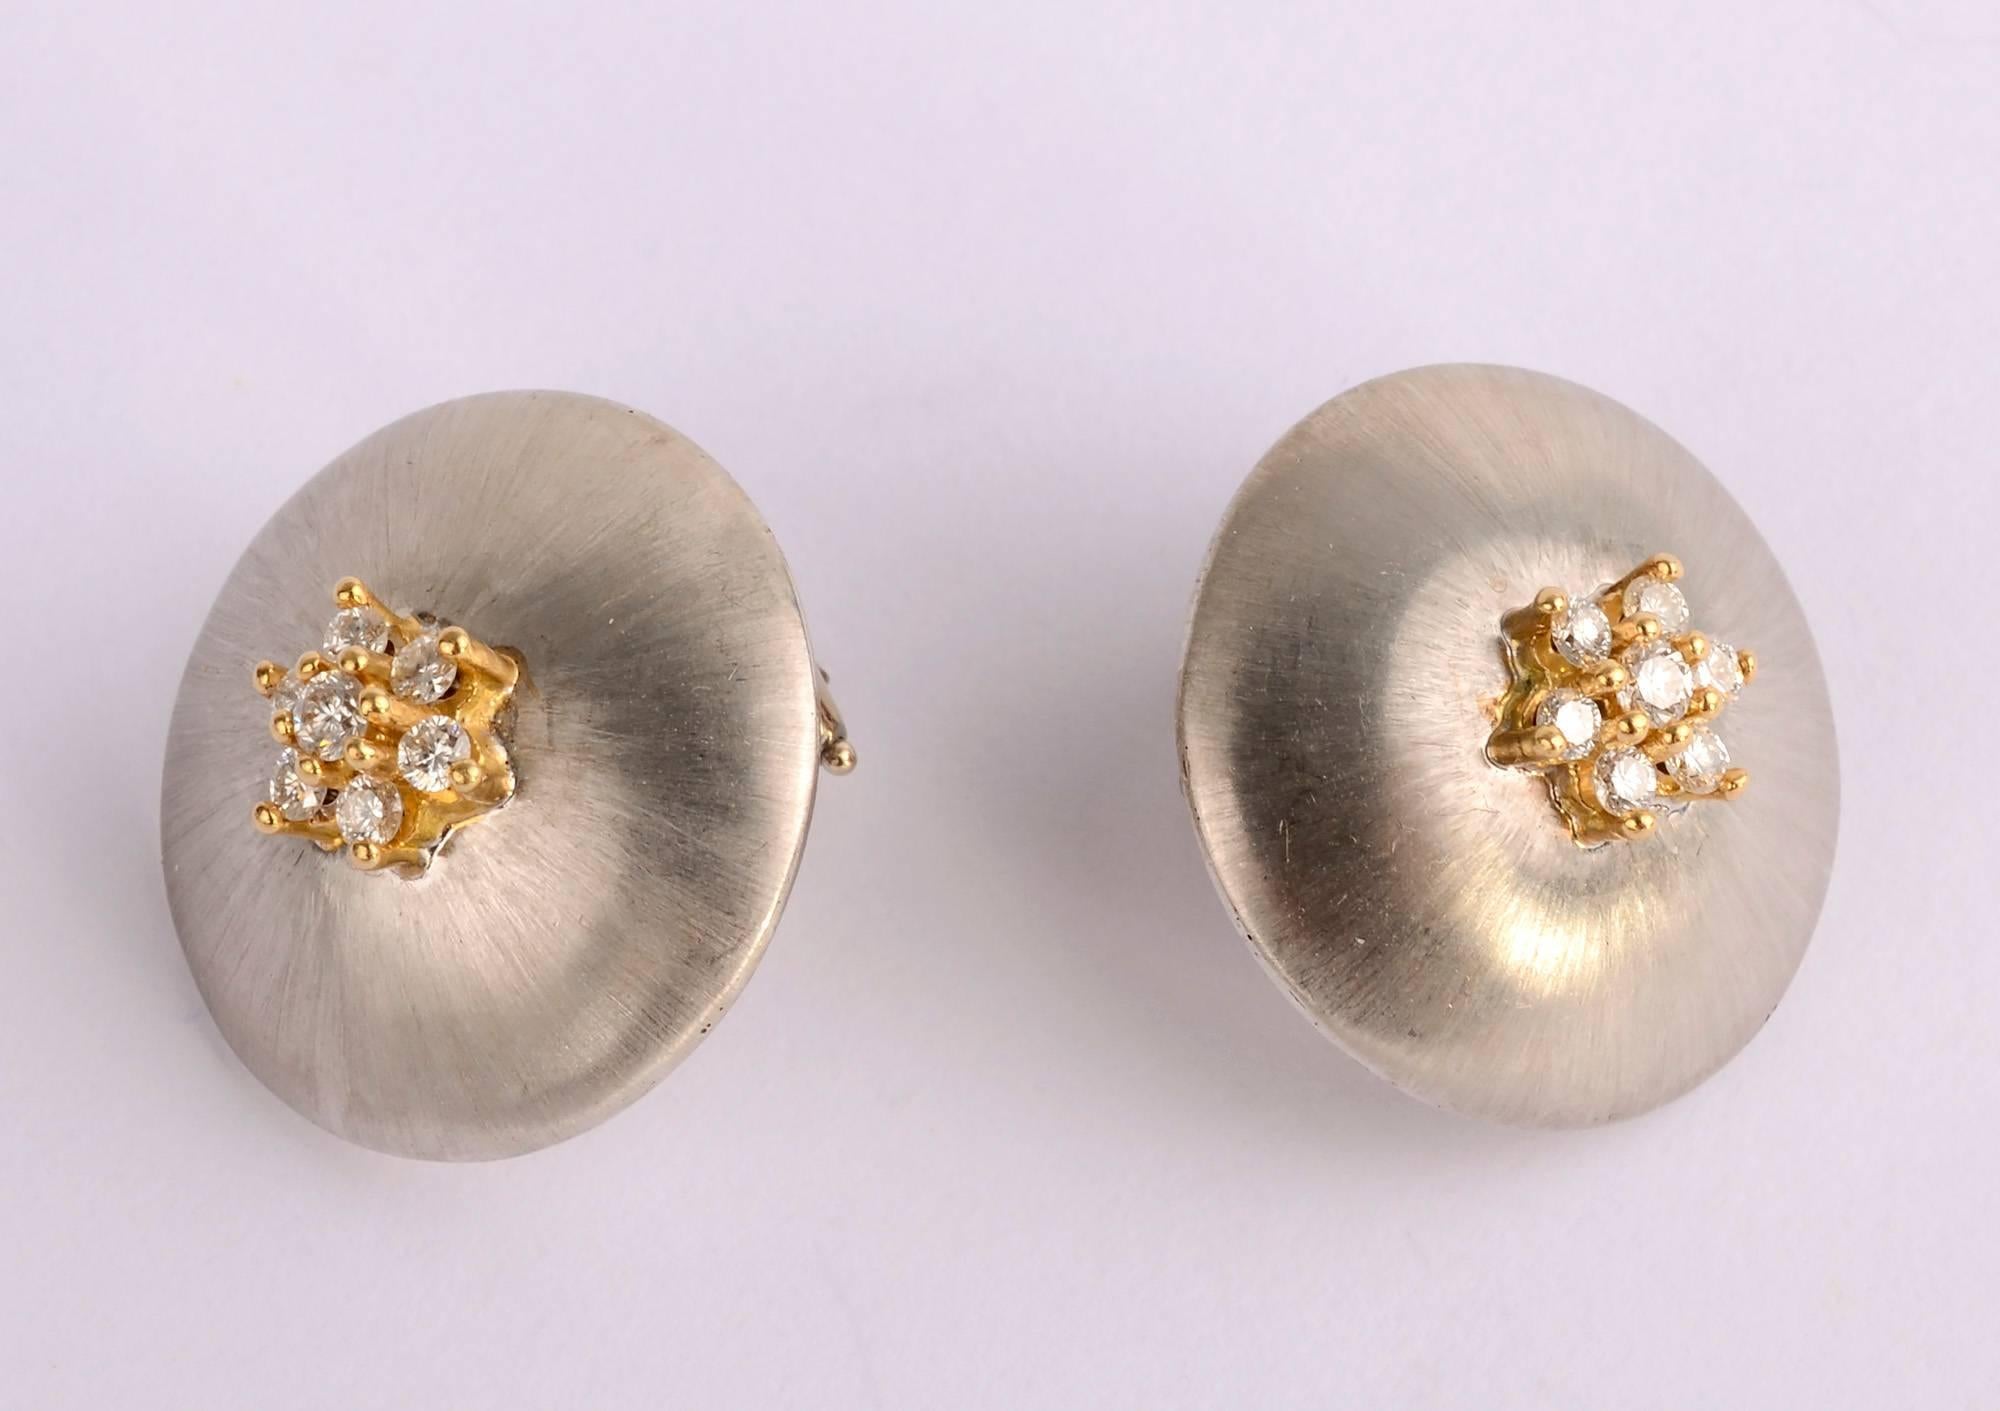 Delicate domed earrings in a slightly brushed white gold with 7 diamonds 
set in yellow gold. They have much of the look of Buccellati without the corresponding price. The front is 18 karat gold with 14 karat clips. The clips can be converted to